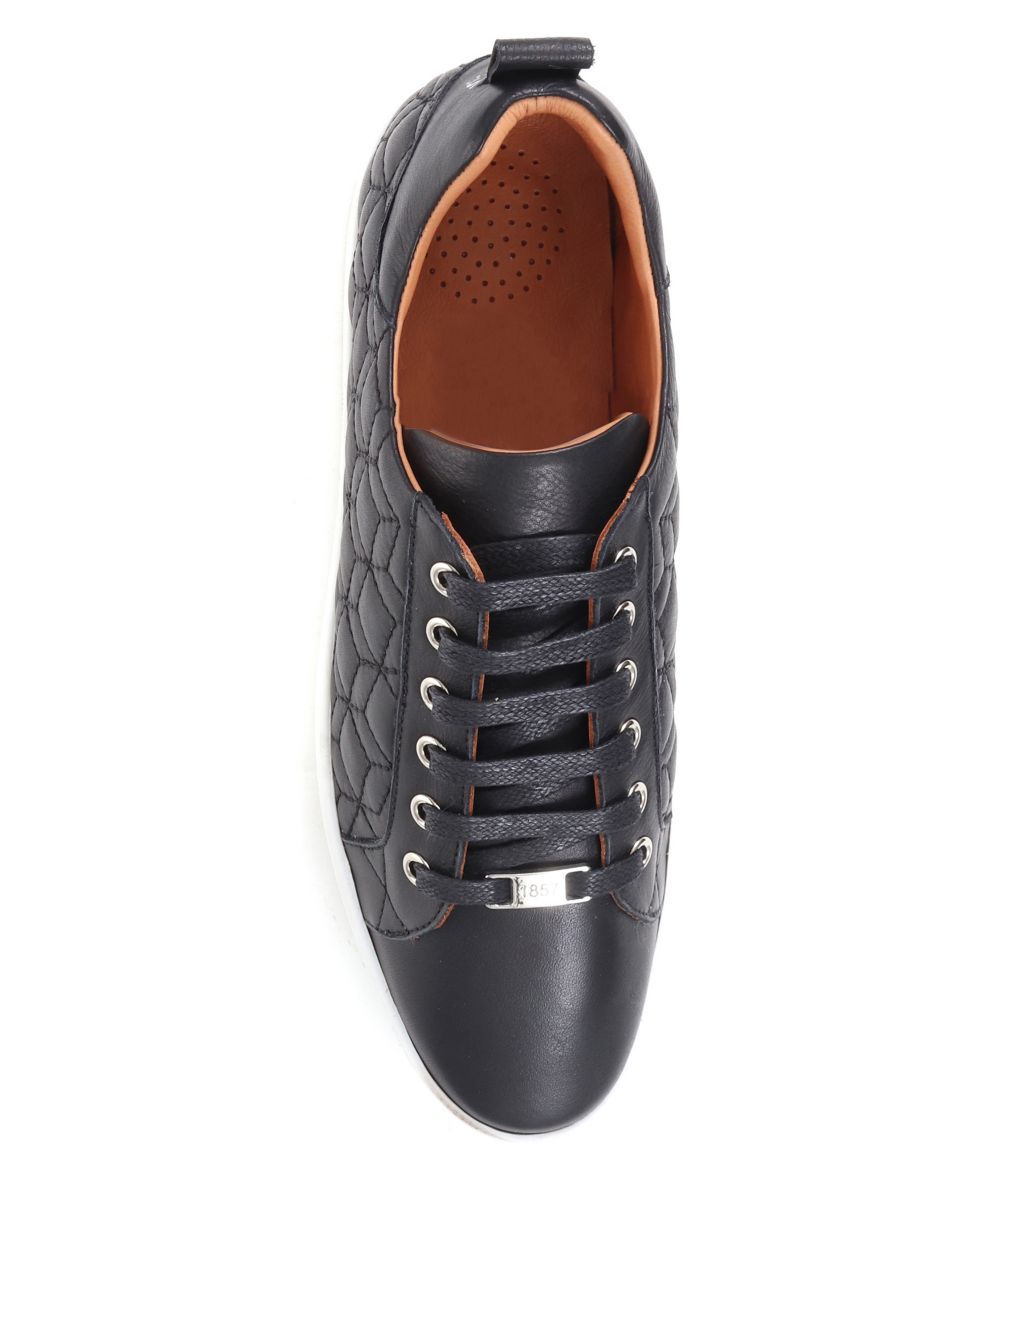 Leather Lace Up Chunky Trainers image 3